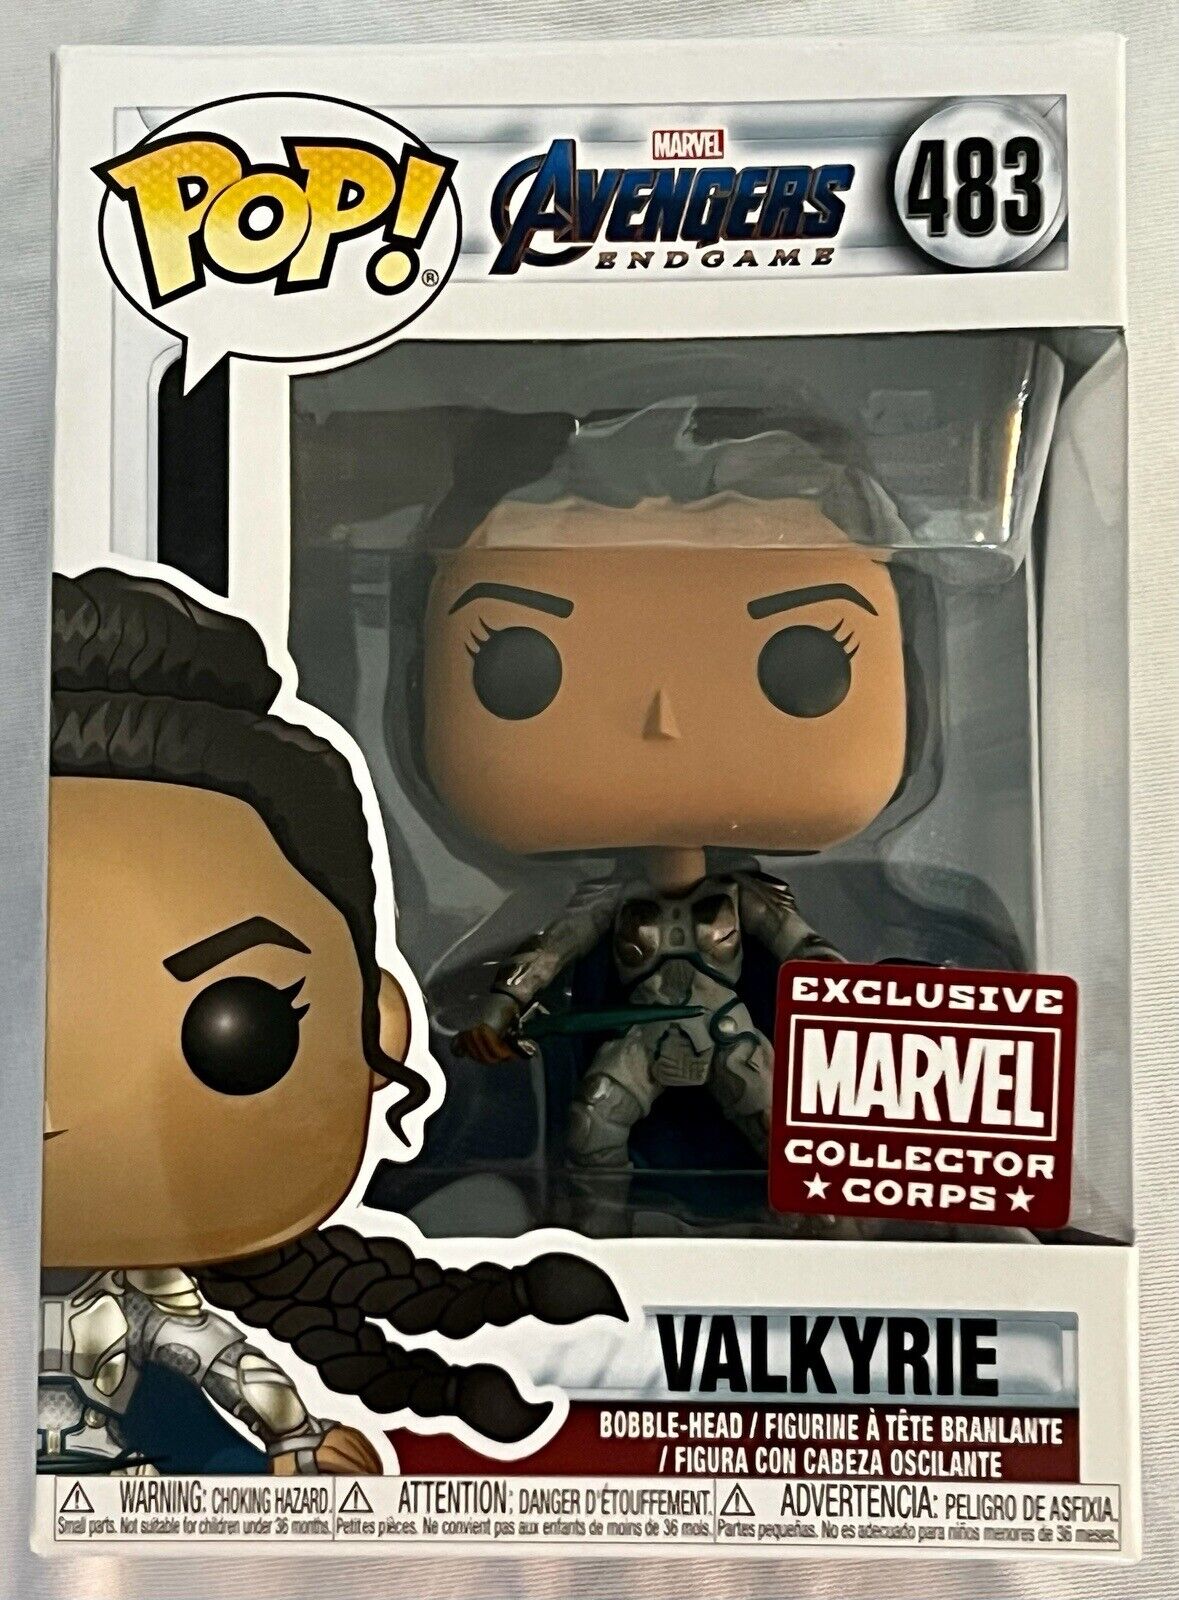 Funko Pop MARVEL Avengers Endgame VALKYRIE 483 Collector Corps exclusive